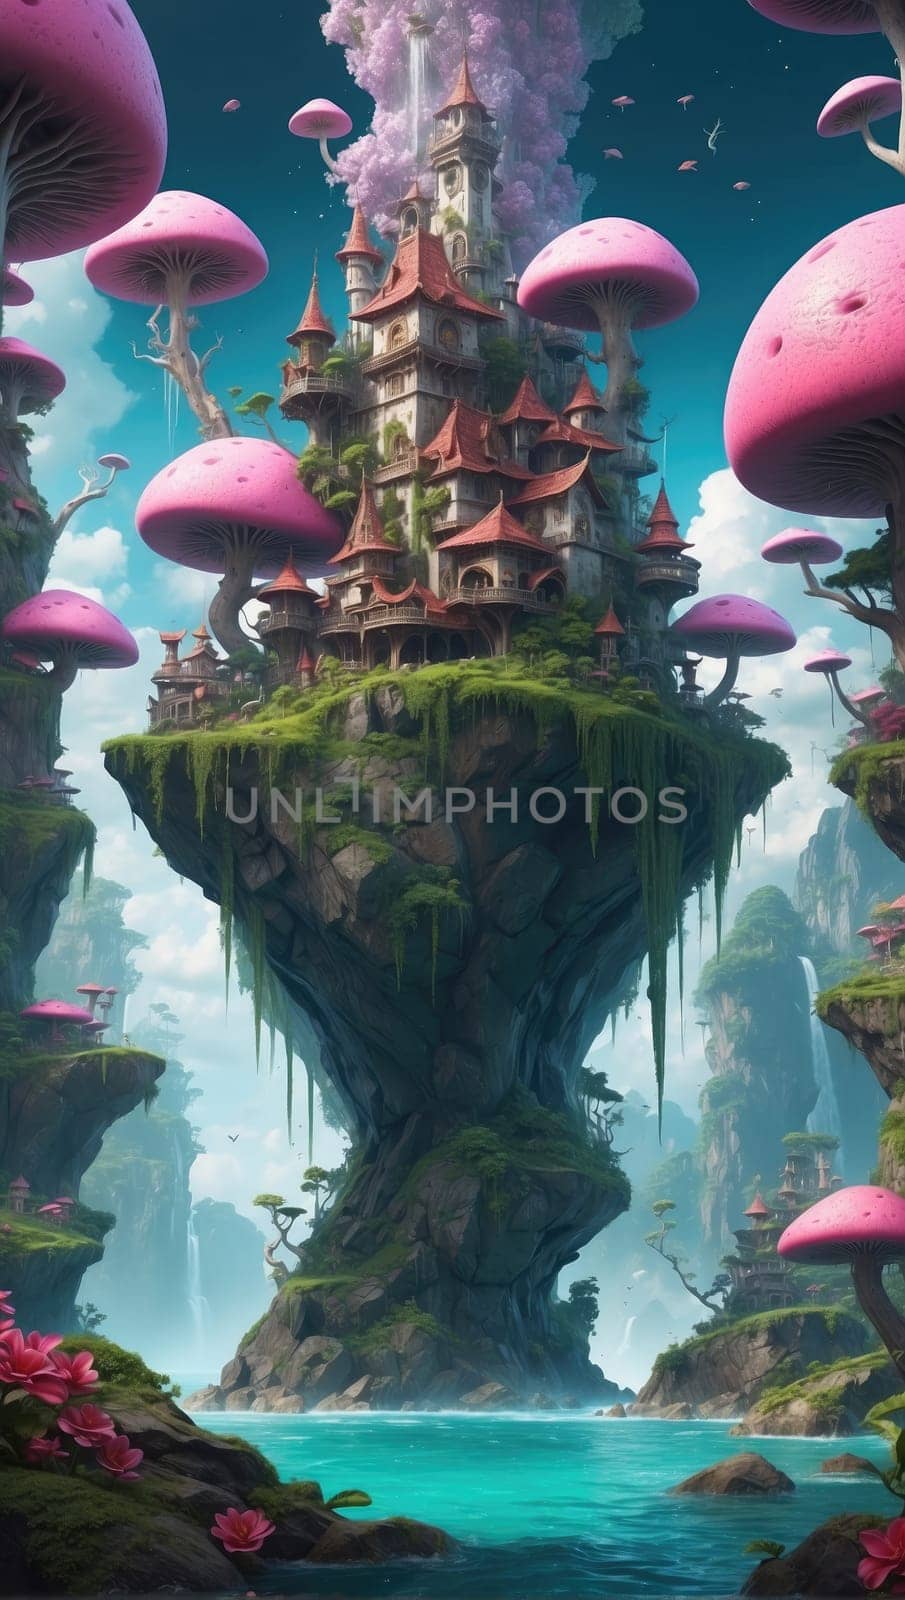 Surreal fairytale city by applesstock